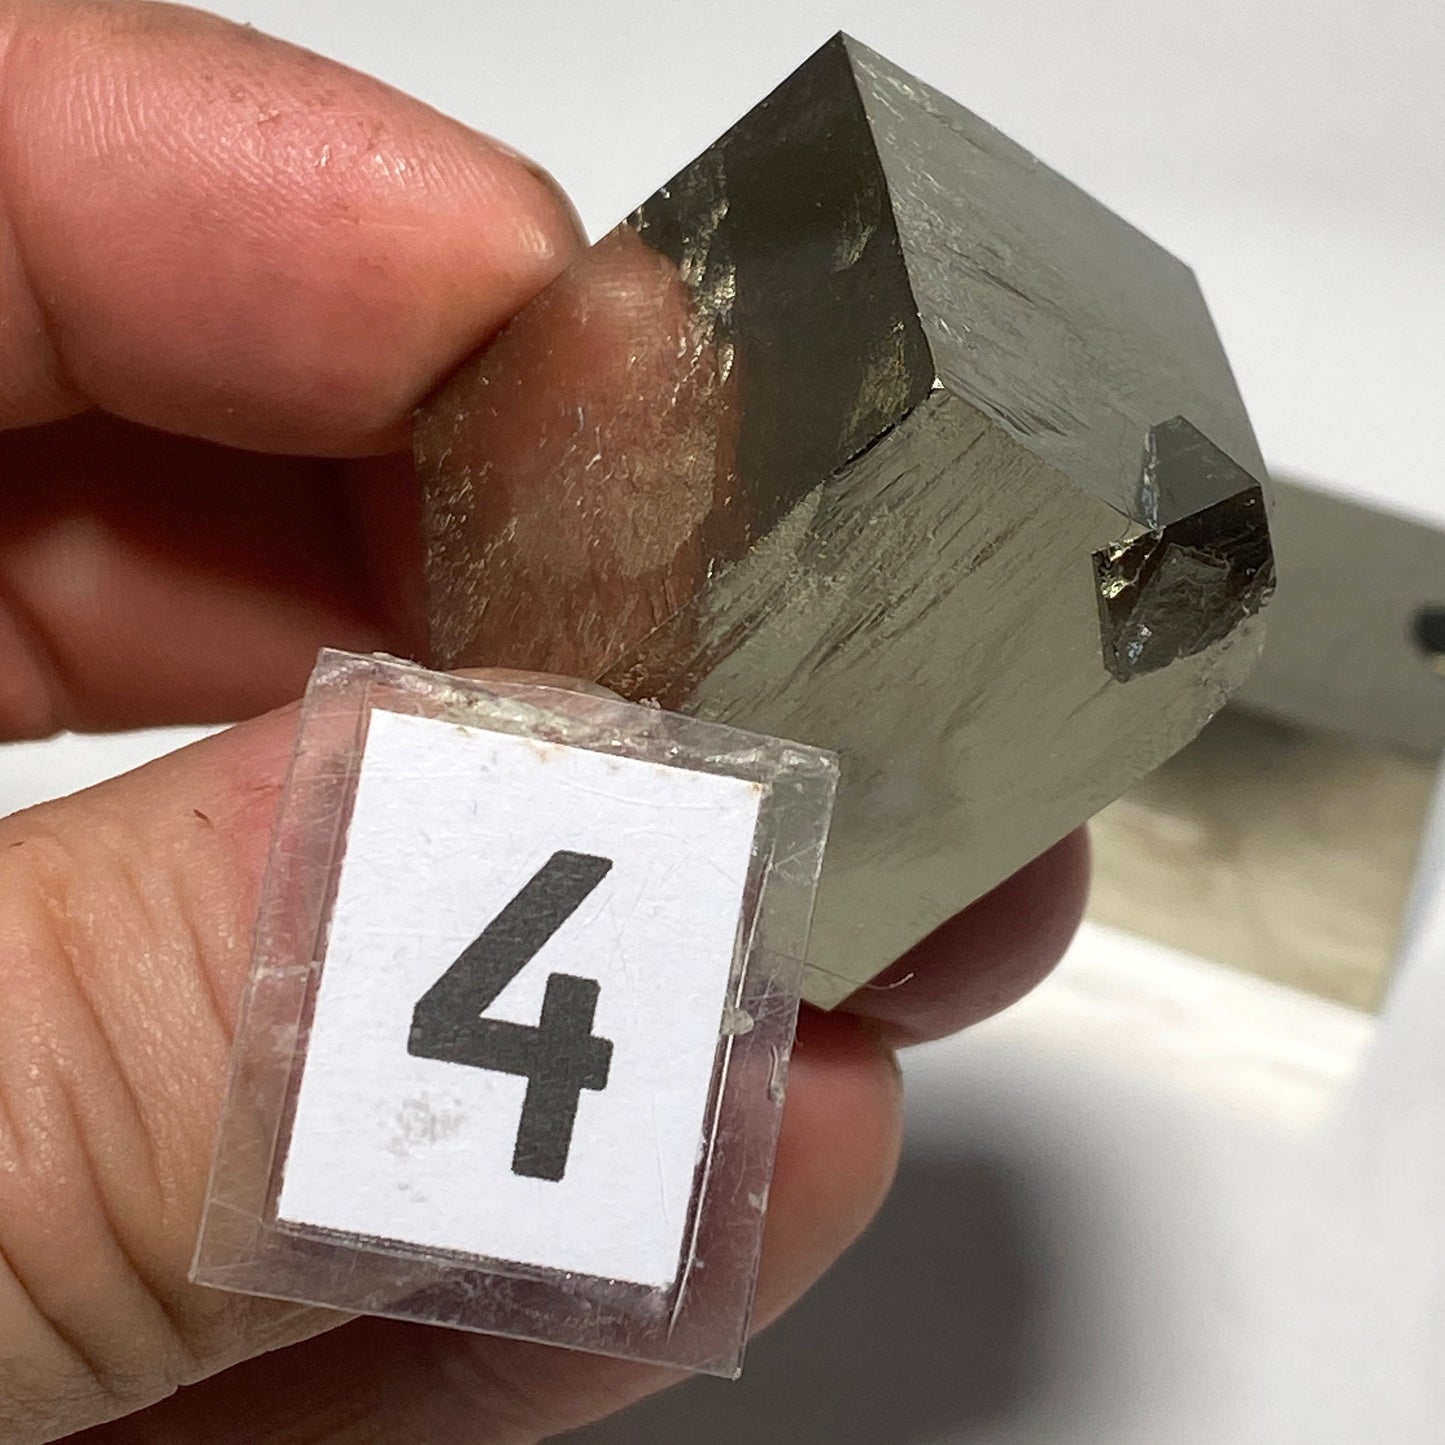 Pyrite cube crystals clusters from Navajun Spain